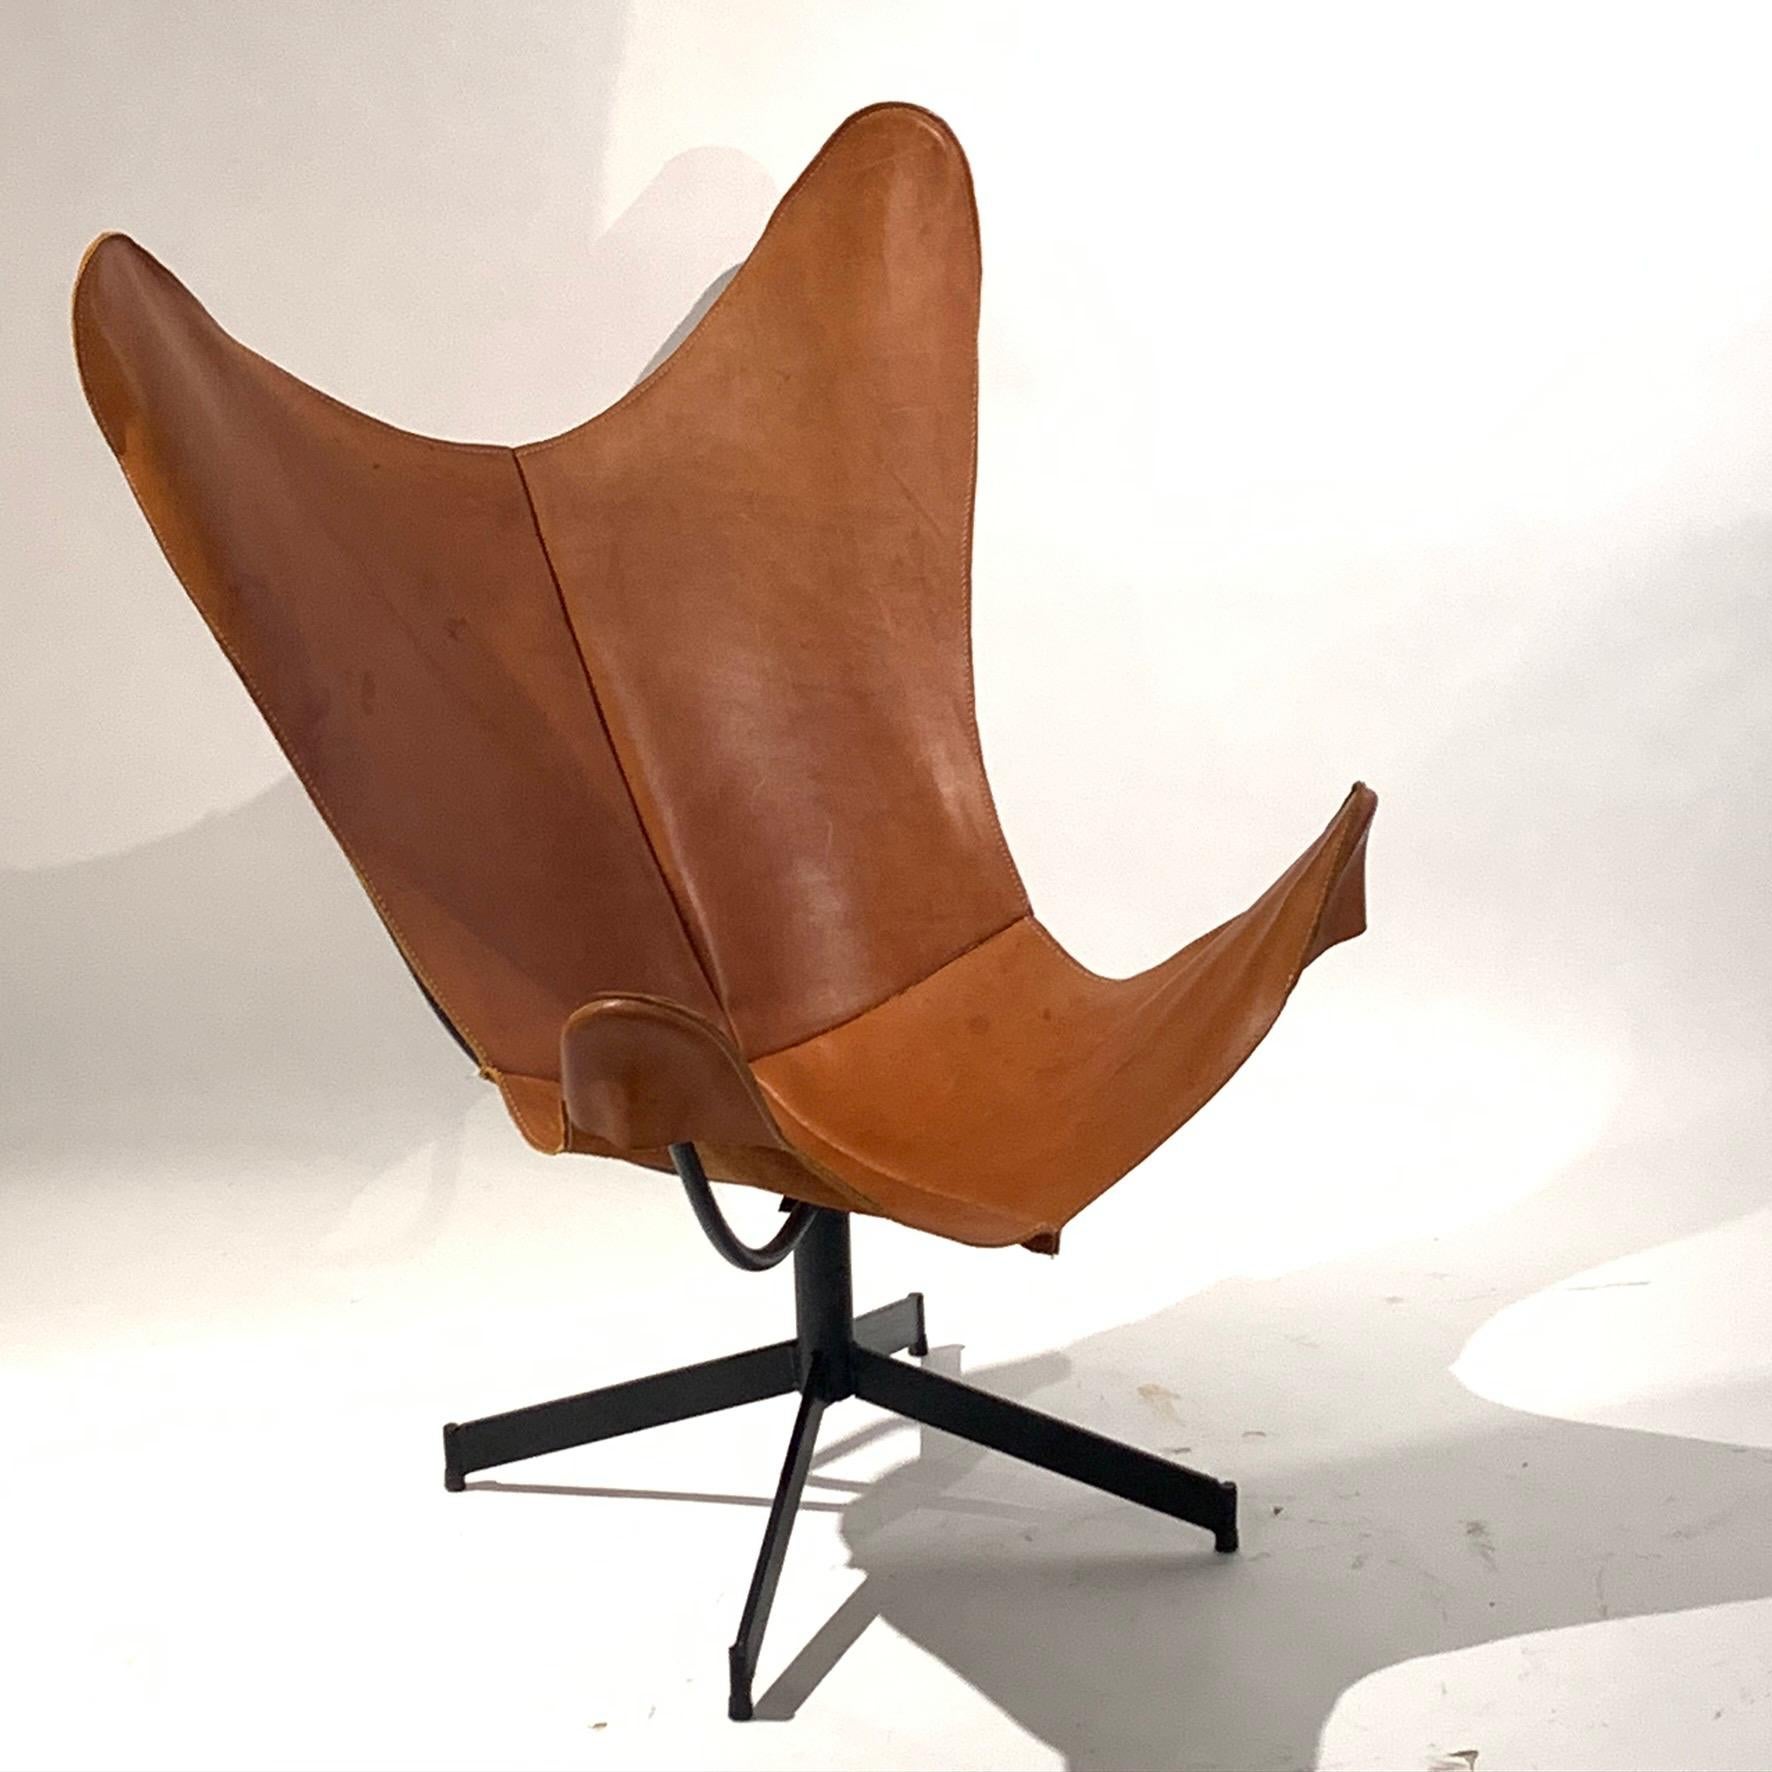 20th Century Rare 1960s William Katavolous Sculptural Leather Swivel Sling Butterfly Chair